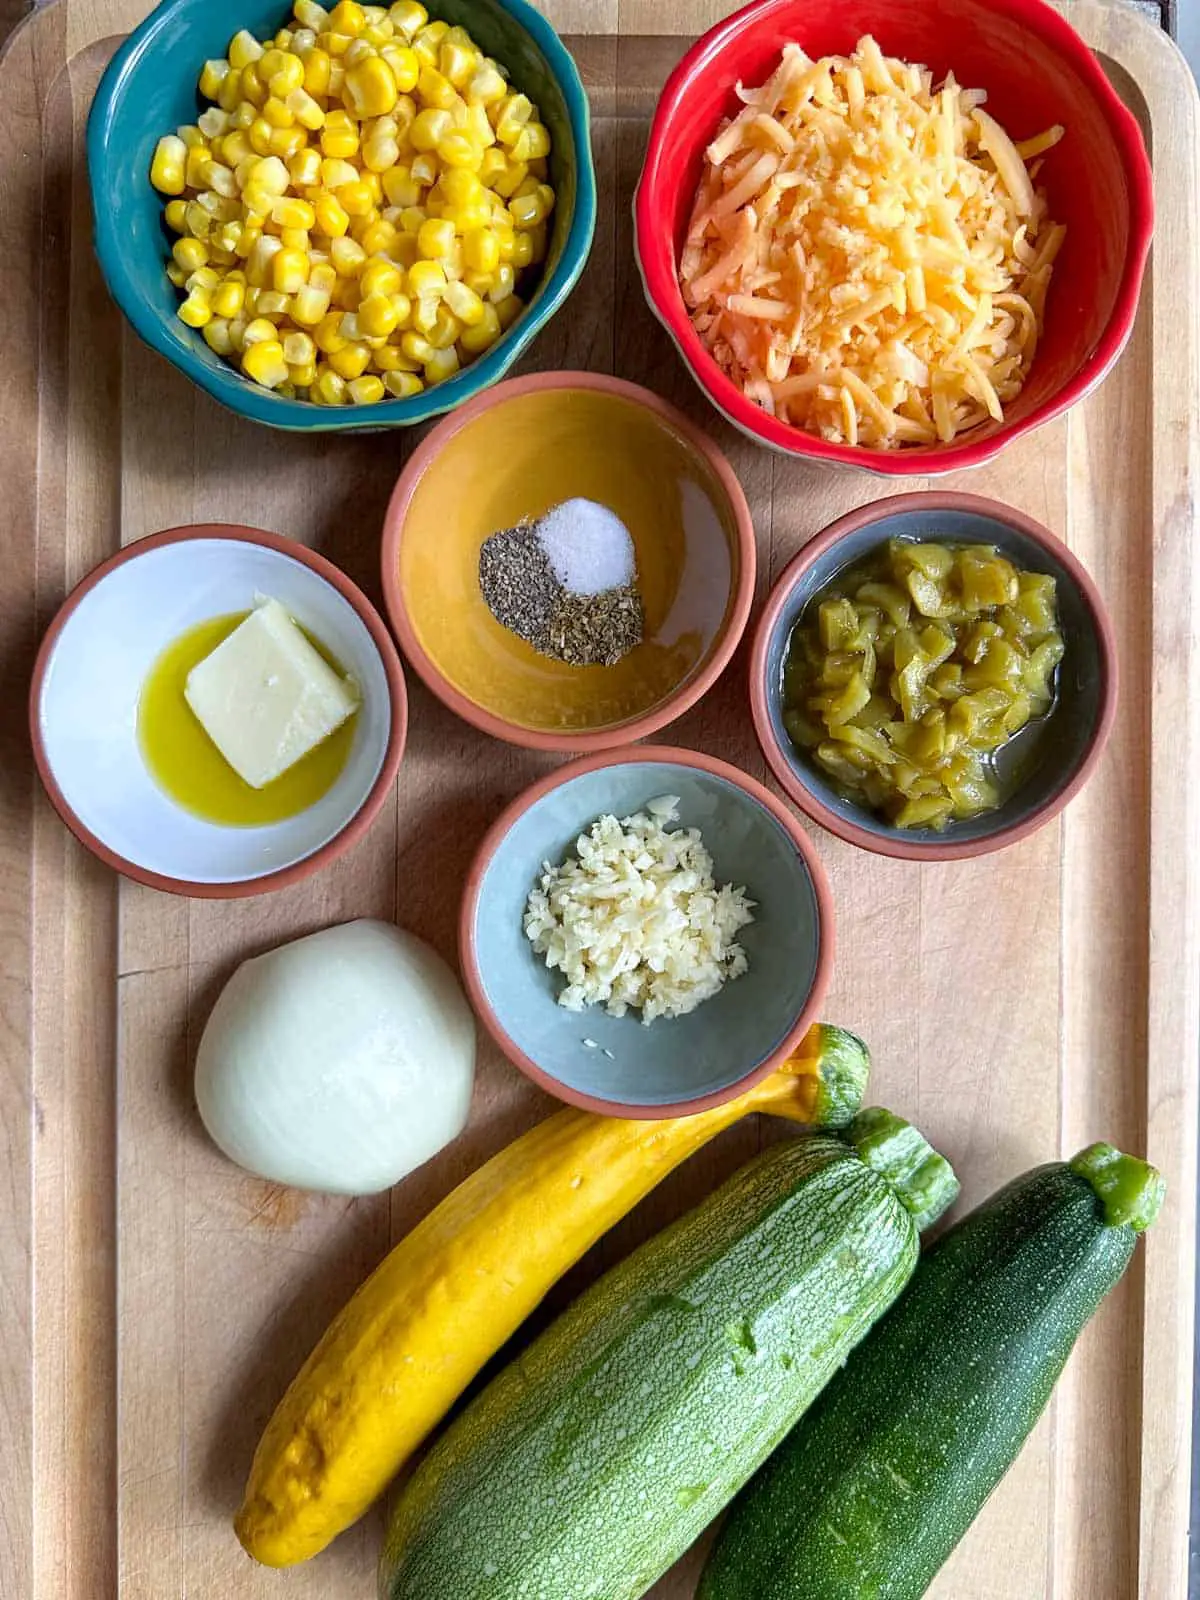 Bowls containing corn, shredded cheddar cheese, butter and olive oil, seasoning, green chilies and garlic. There are also half an onion and 3 different squashes pictured.